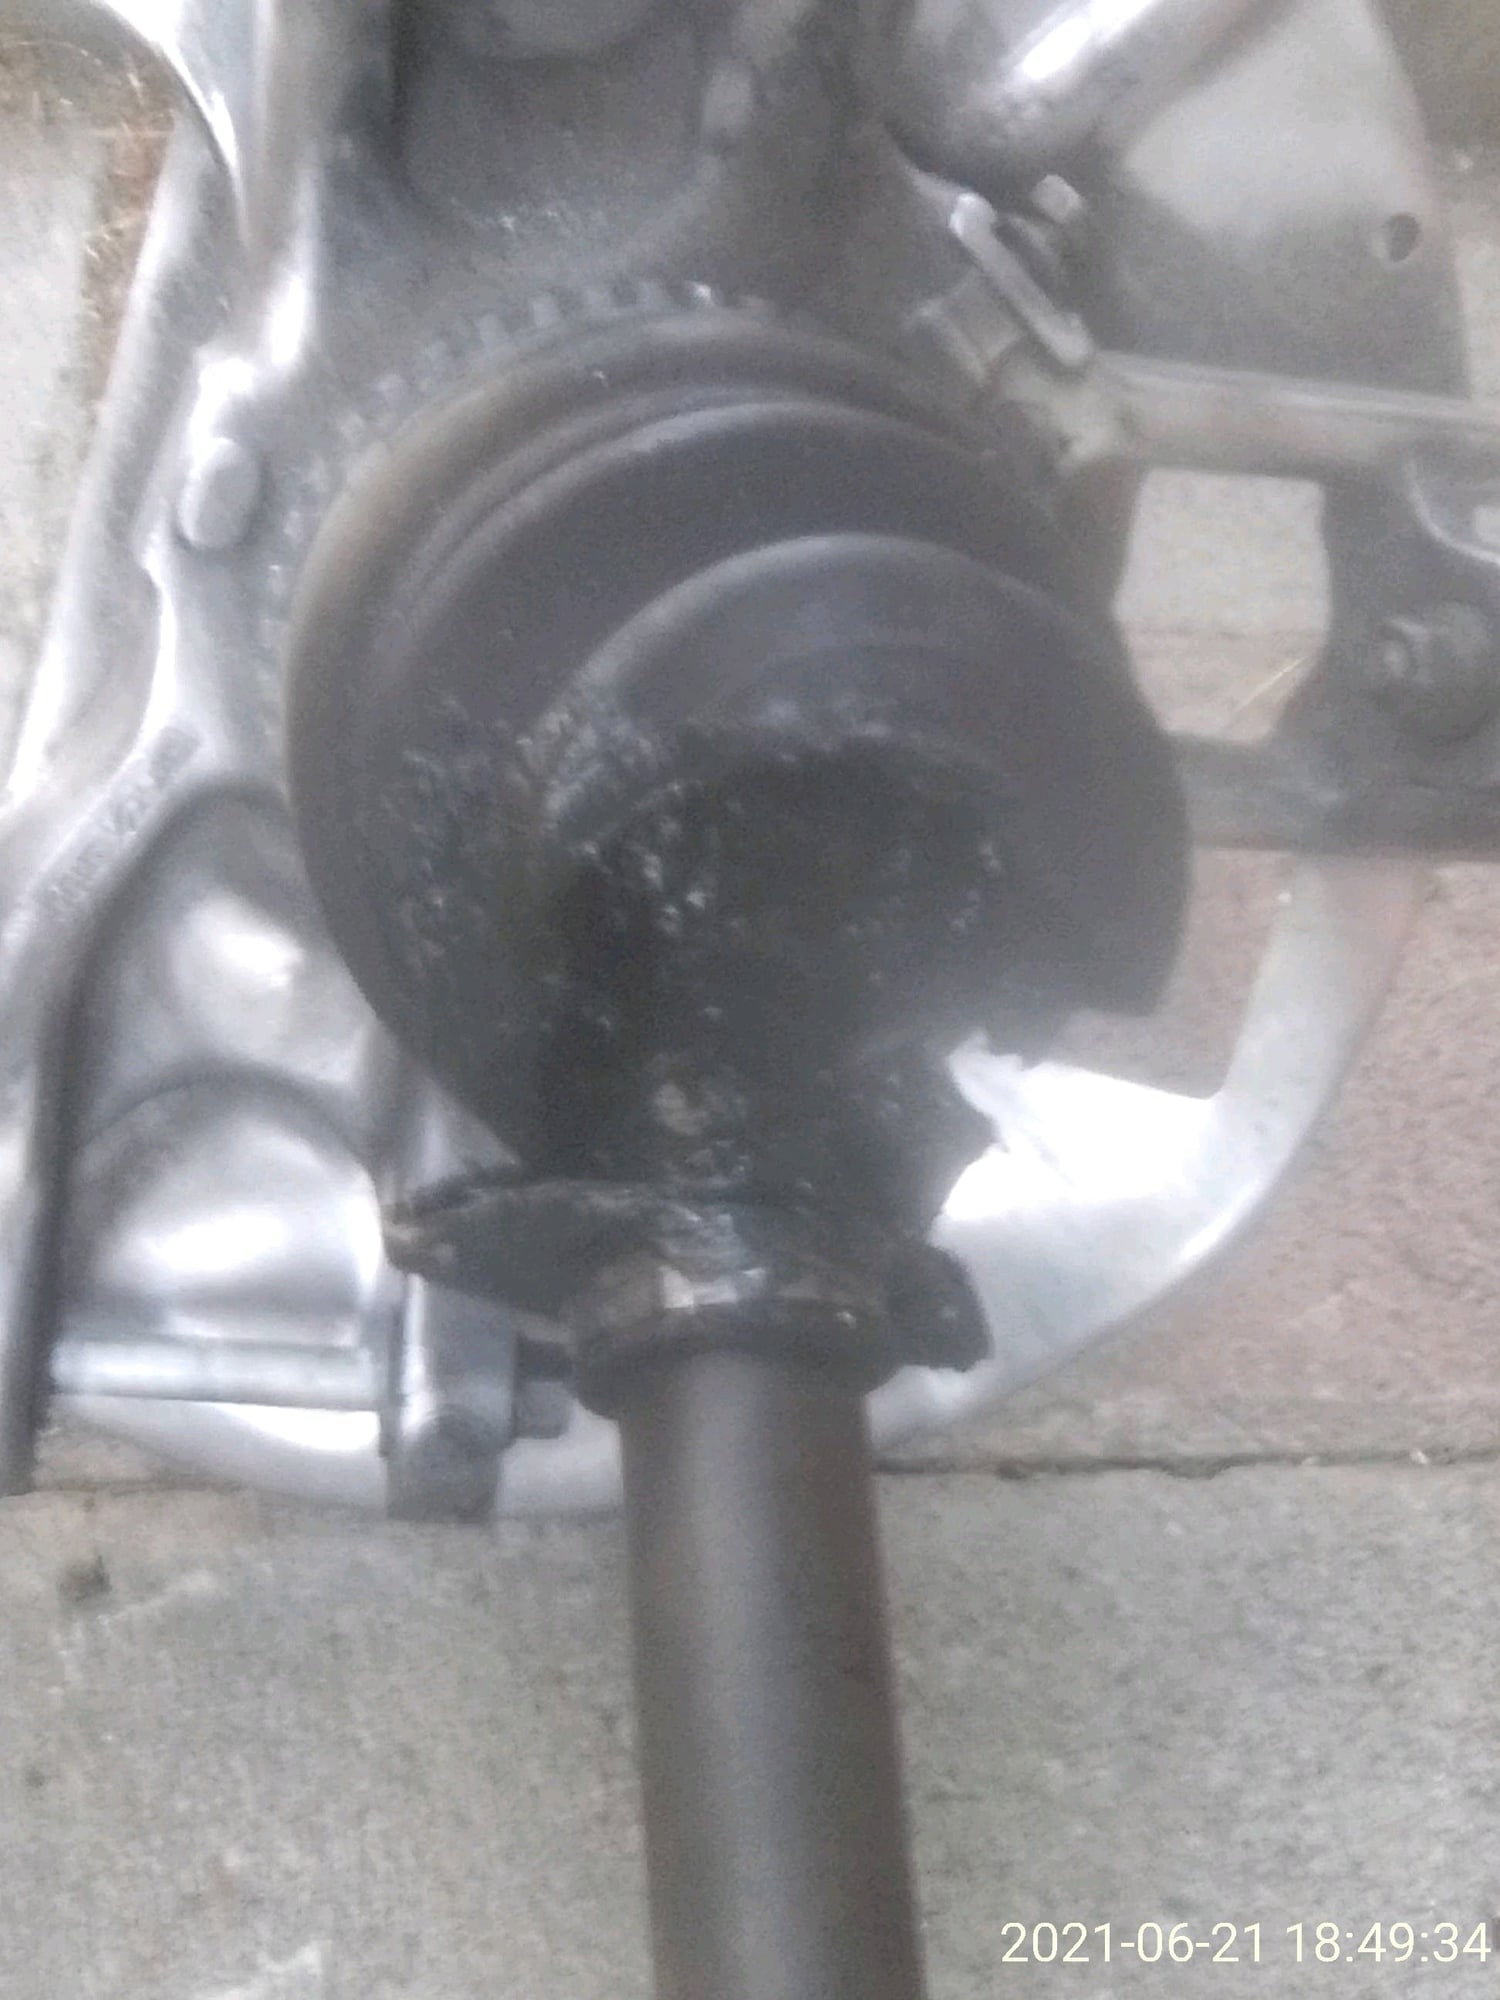 Steering/Suspension - FD3S OEM Left Rear Axel CV - Used - 1993 to 2002 Mazda RX-7 - San Jose, CA 95121, United States